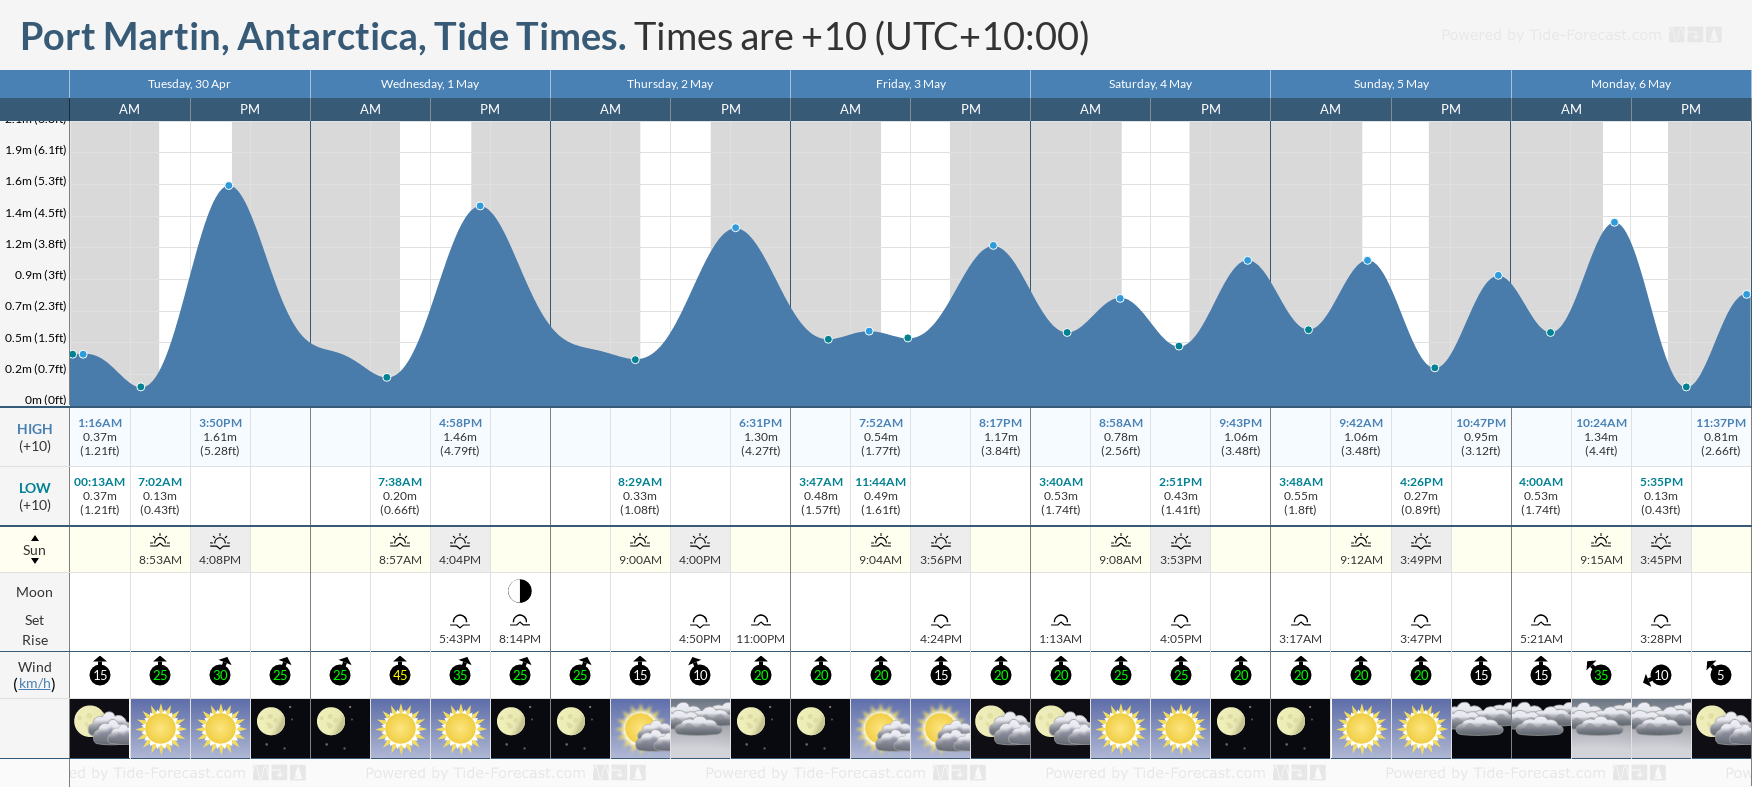 Port Martin, Antarctica Tide Chart including high and low tide tide times for the next 7 days